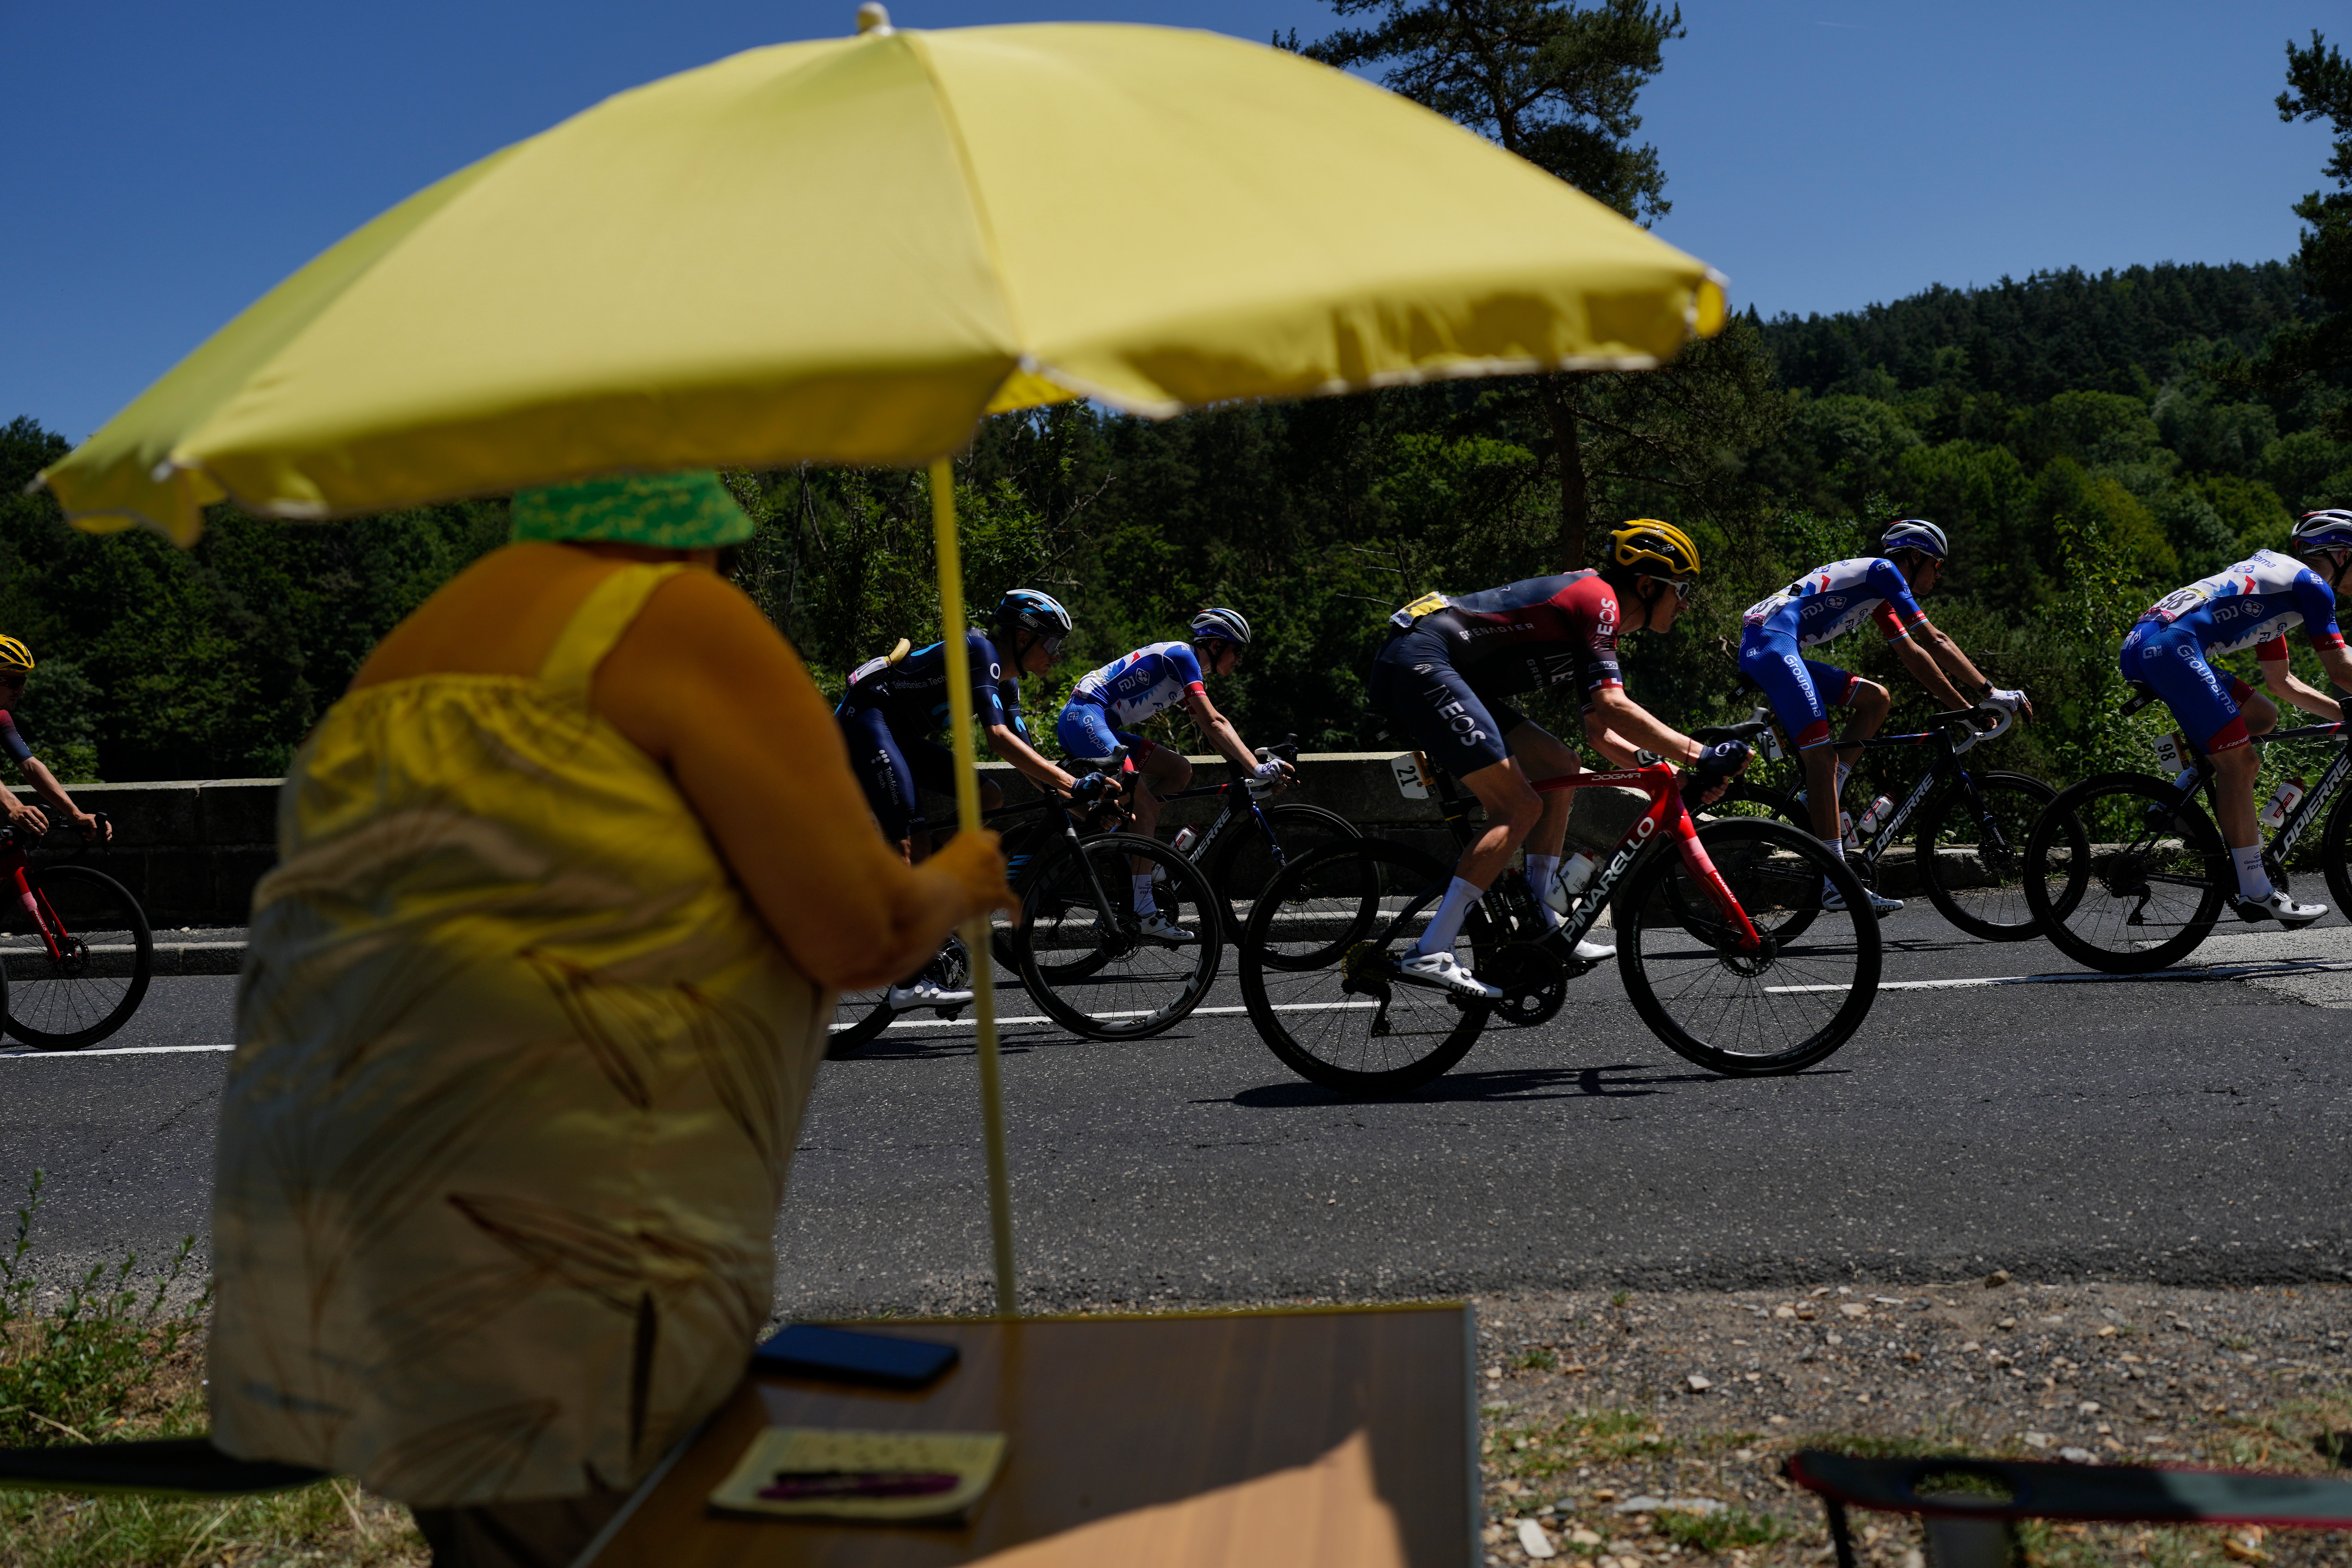 Riders struggled to keep cool in temperatures reaching 40 degrees on Saturday (Thibault Camus/AP)